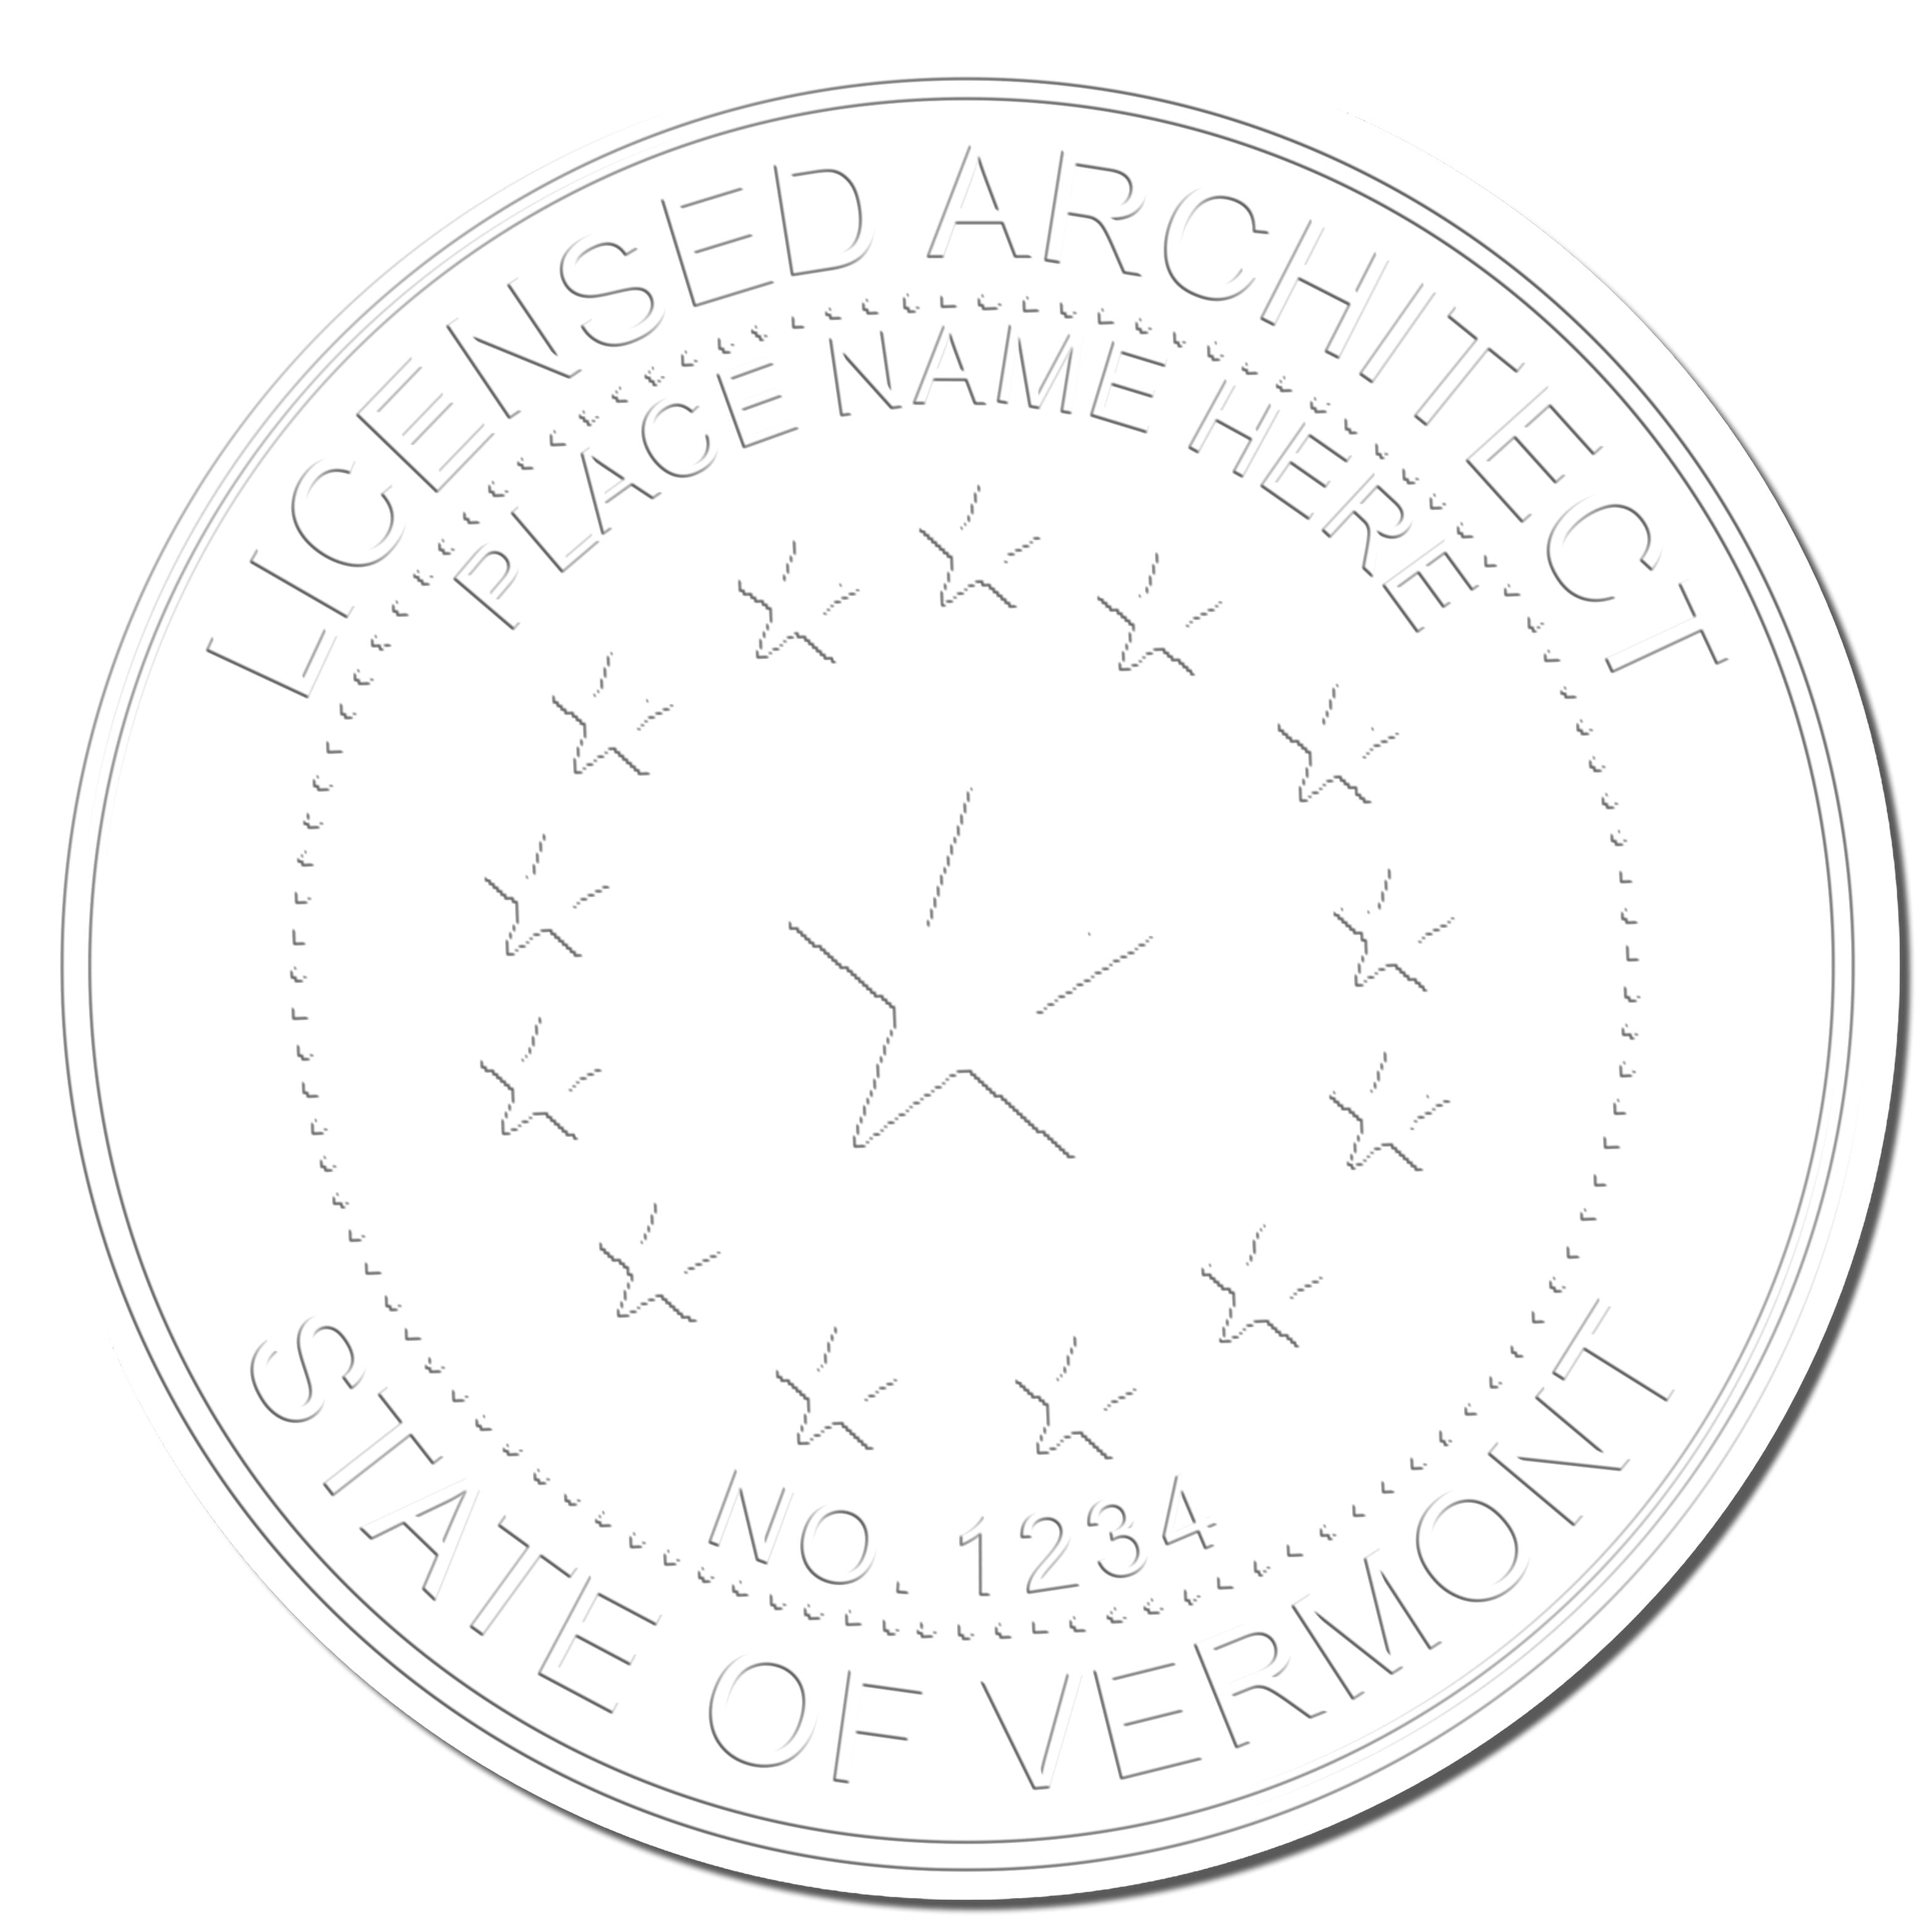 A stamped impression of the State of Vermont Long Reach Architectural Embossing Seal in this stylish lifestyle photo, setting the tone for a unique and personalized product.